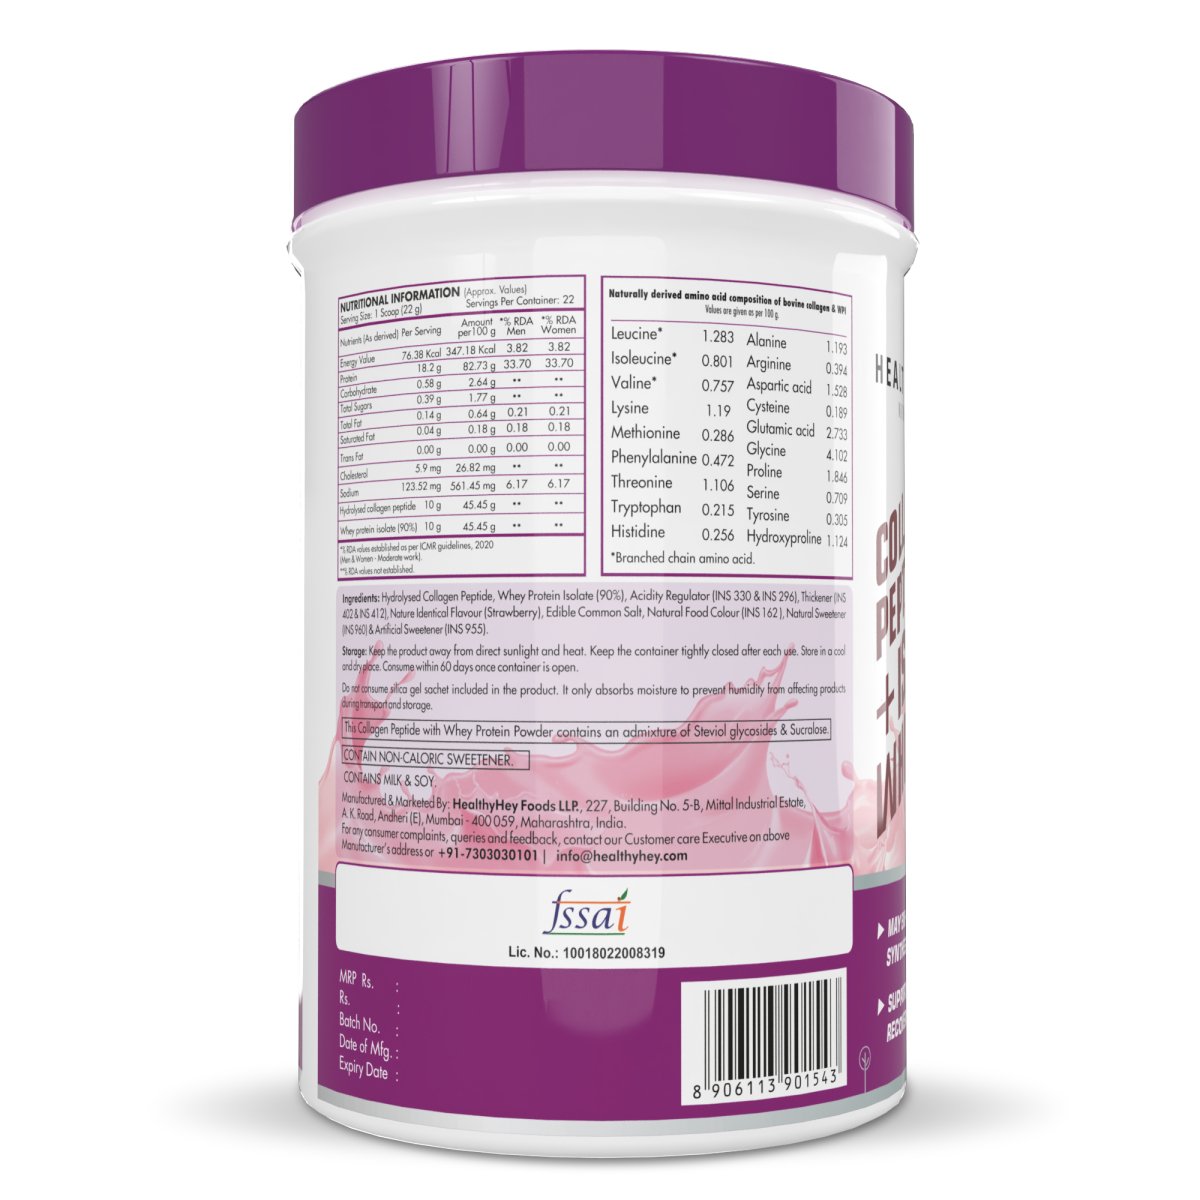 Collagen Peptides with ISO Whey Protein - 7g EAA, 2.5g BCAA - Strawberry, 500g - HealthyHey Nutrition